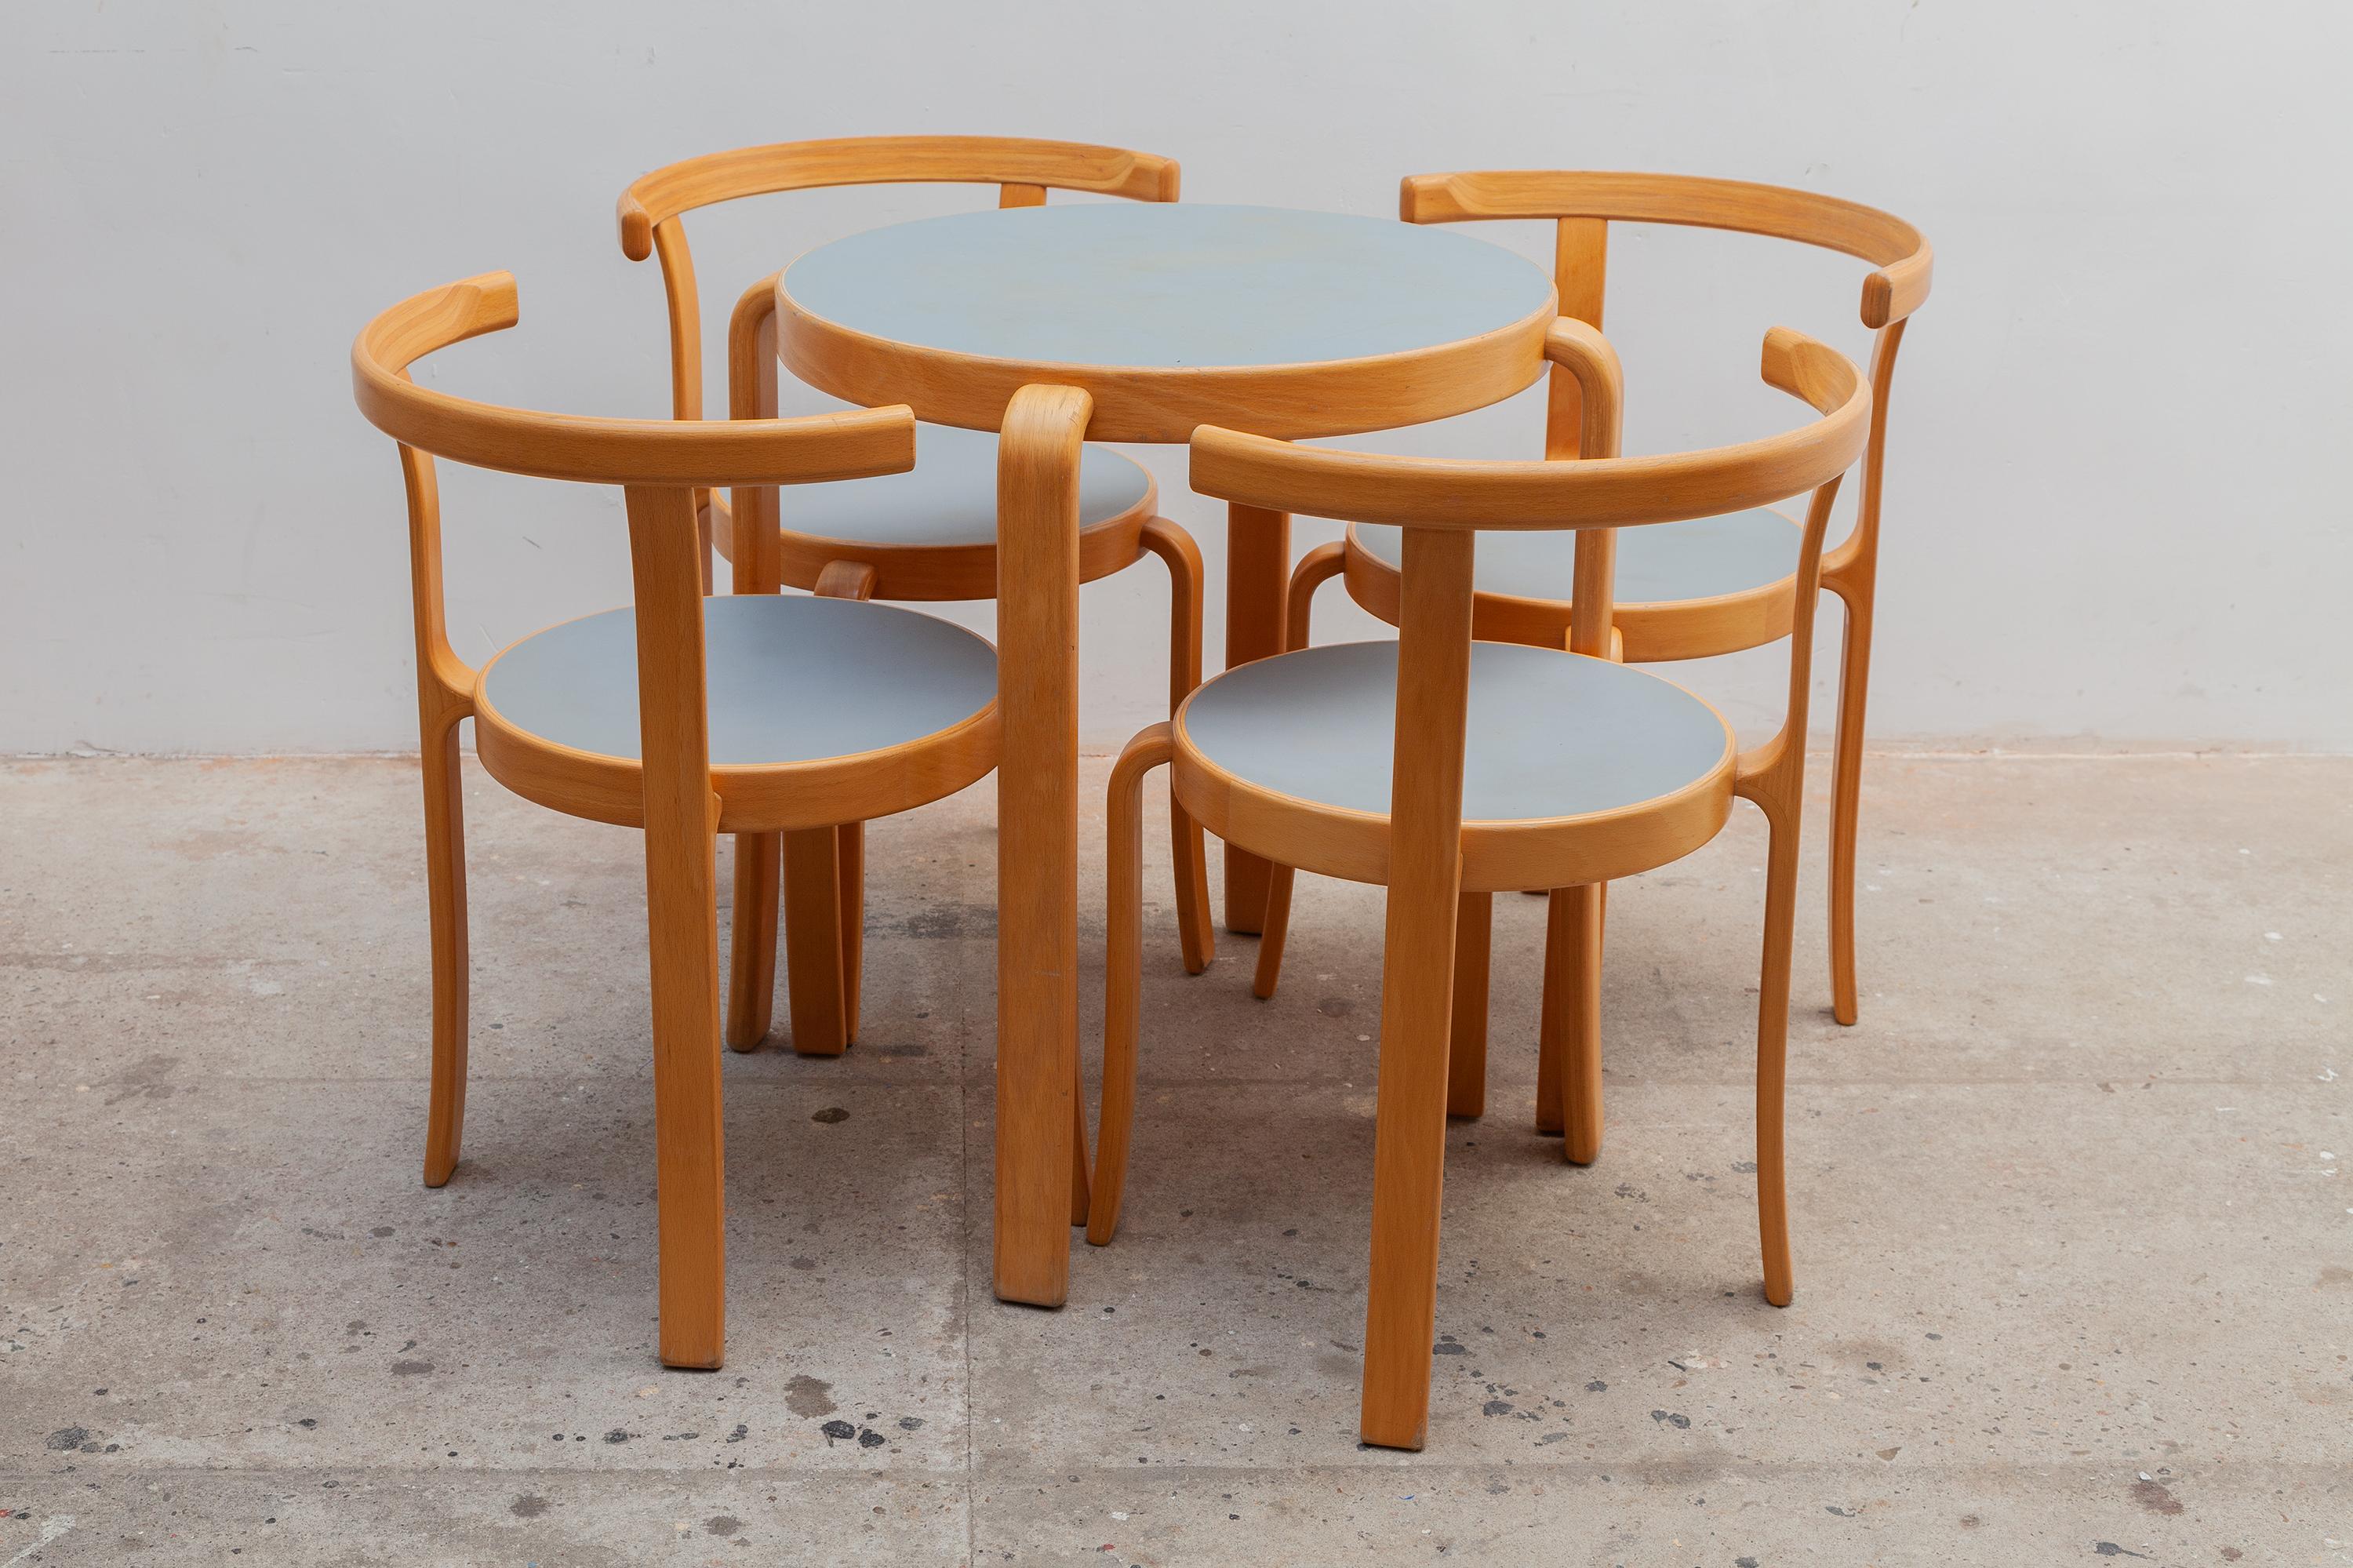 Vintage set of four Danish dining room chairs and table designed by Rud Thygsen & Johnny Sorensen for Magnus Olesen in 1981. These chairs are from the 8000 series the round shapes are characteristic of these designers. These chairs are made with a